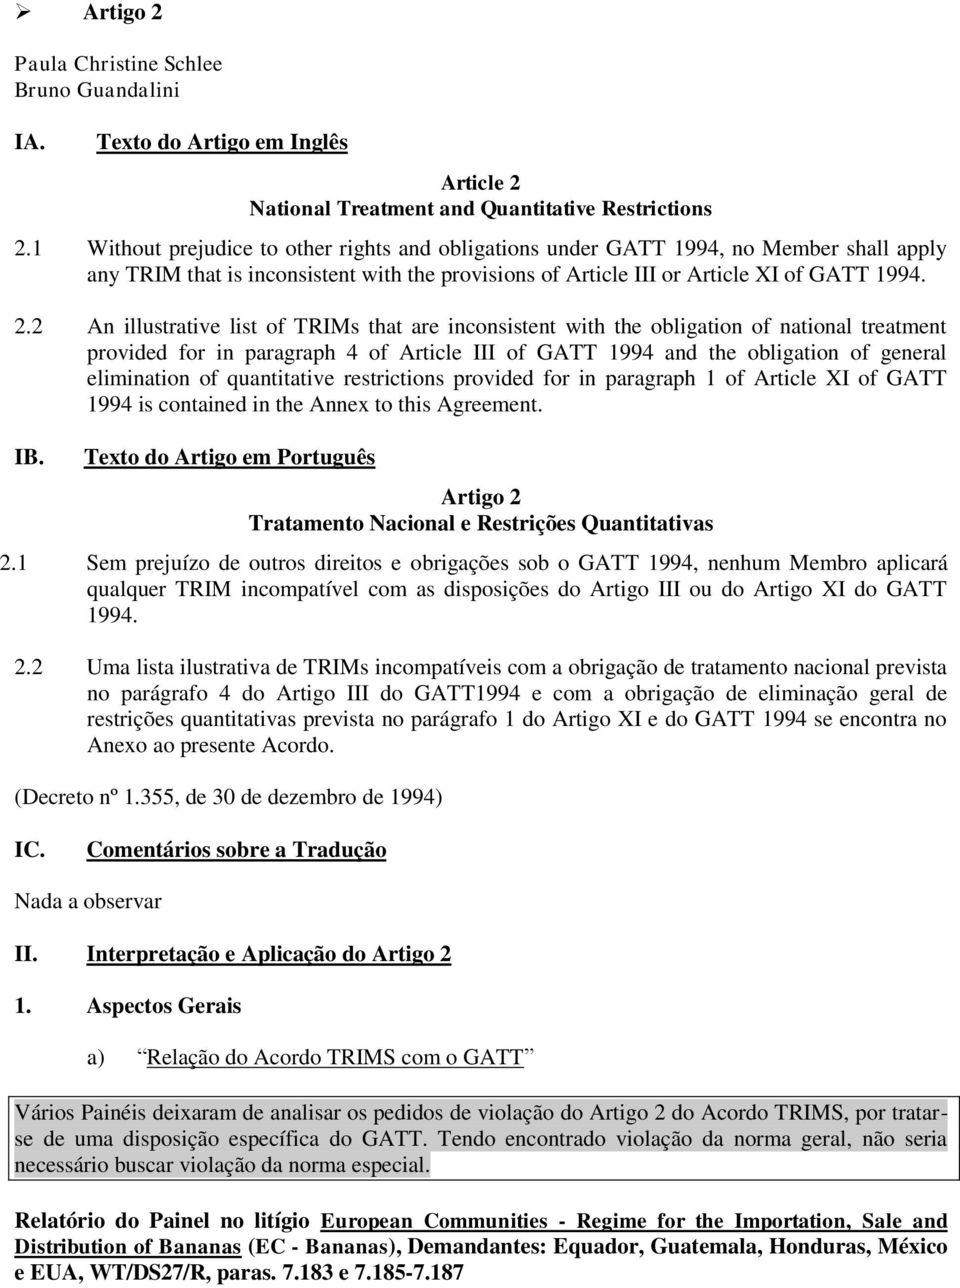 2 An illustrative list of TRIMs that are inconsistent with the obligation of national treatment provided for in paragraph 4 of Article III of GATT 1994 and the obligation of general elimination of